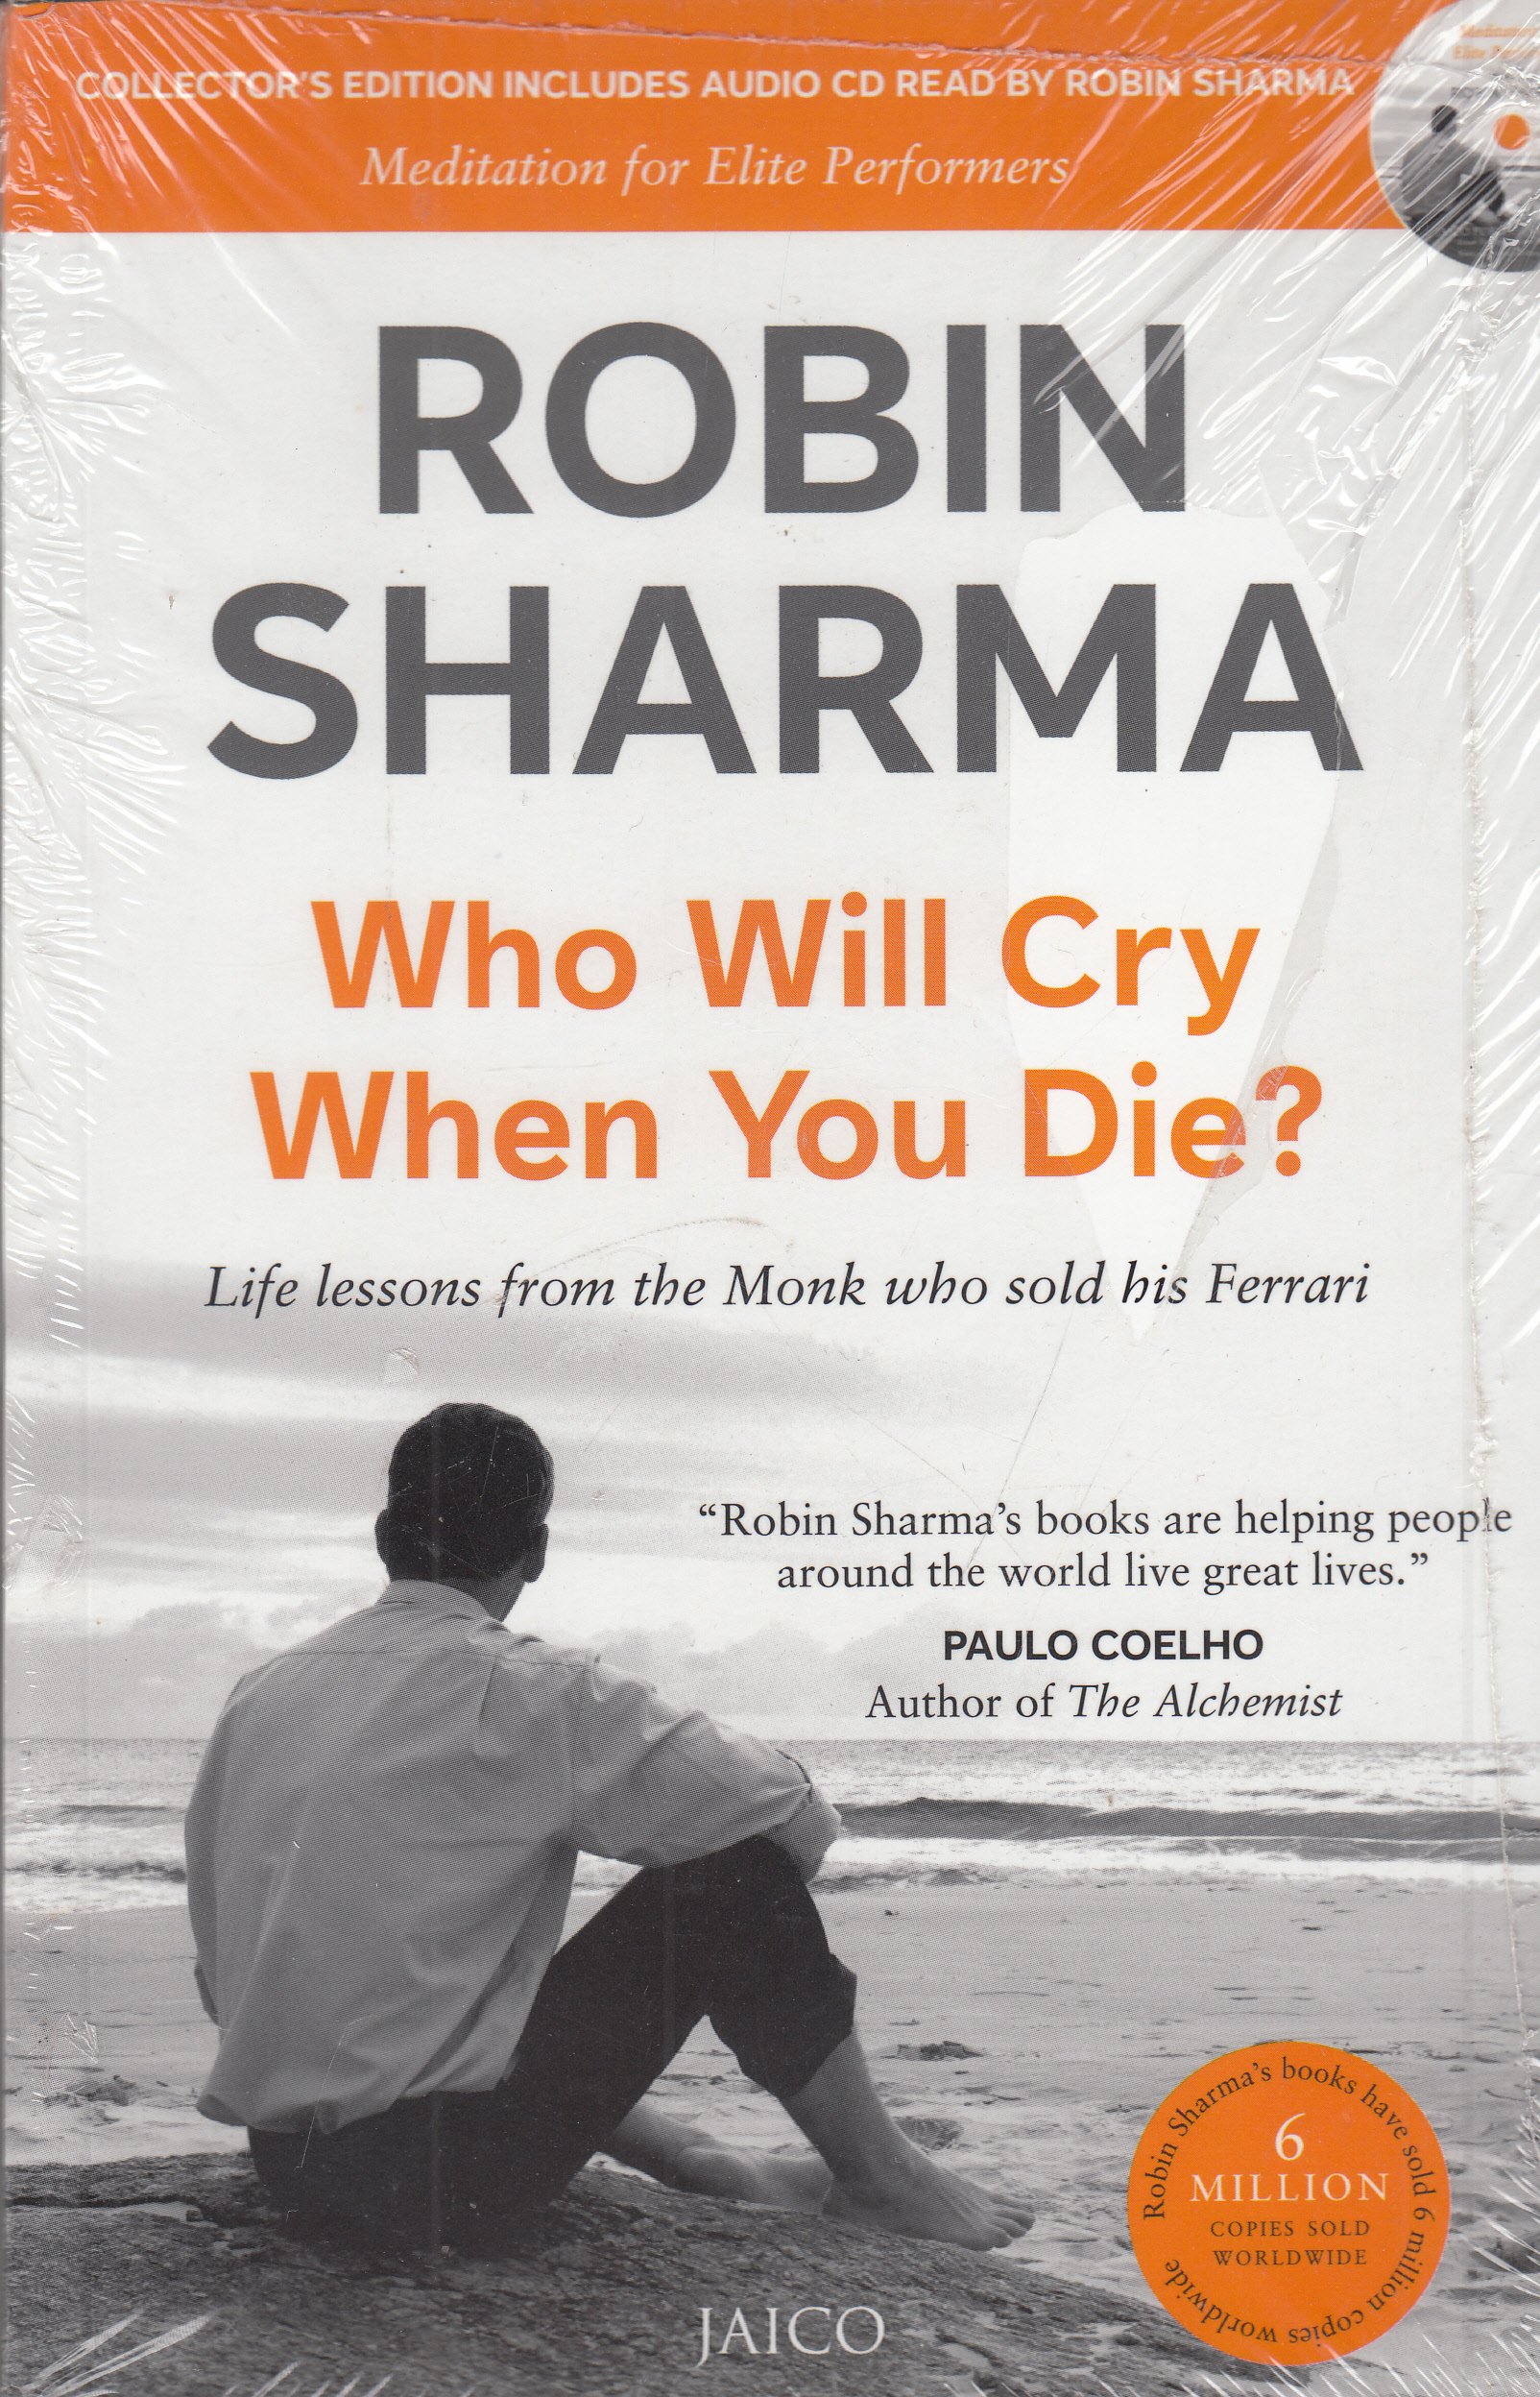 Who Will Cry When You Die: 101 Life Lessons from the Monk who Sold his Ferrari